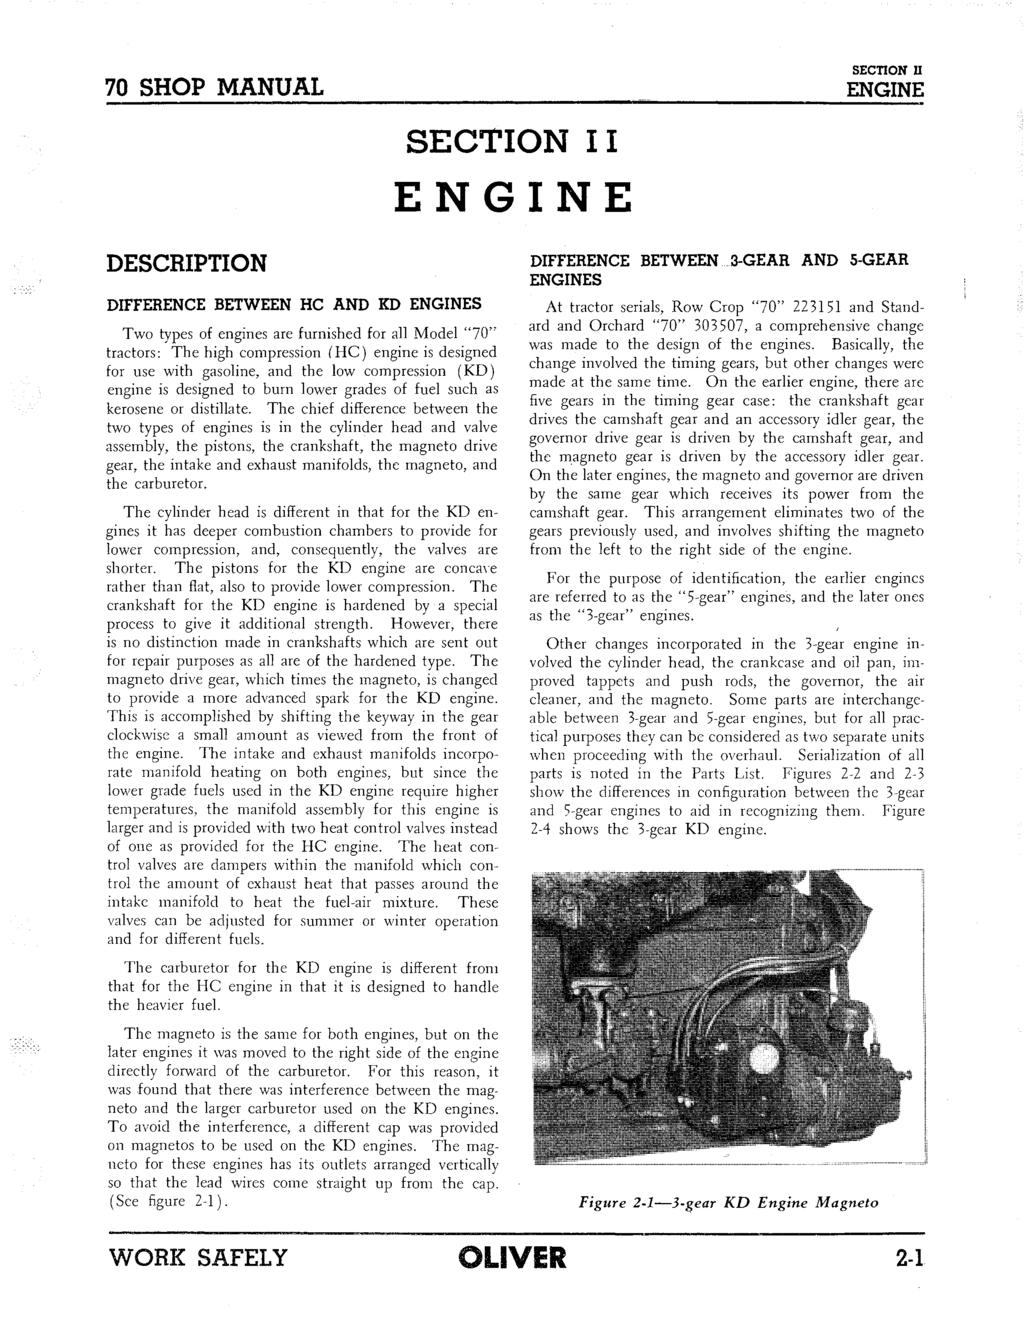 SECTION U 70 SHOP MANUAL ENGINE SECTION II ENGINE DESCRIPTION DIFFERENCE BETWEEN HC AND KD ENGINES Two types of engines are furnished for all Model "70" tractors: The high compression (HC) engine is